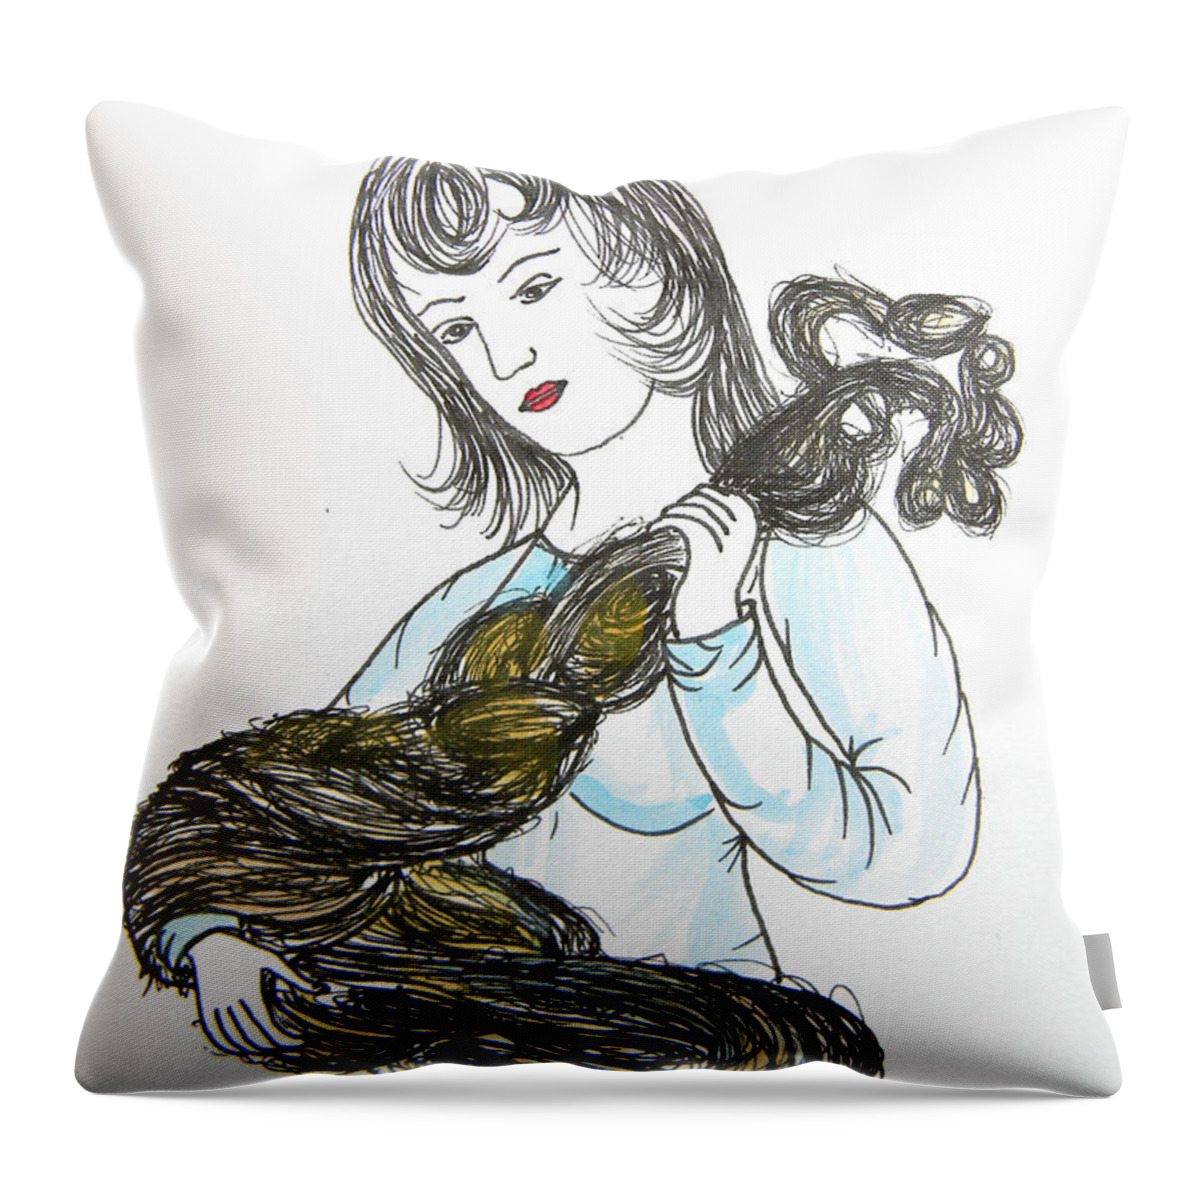 Maiden Wiser Than The Tsar Throw Pillow featuring the drawing Girl and Tow by Marwan George Khoury